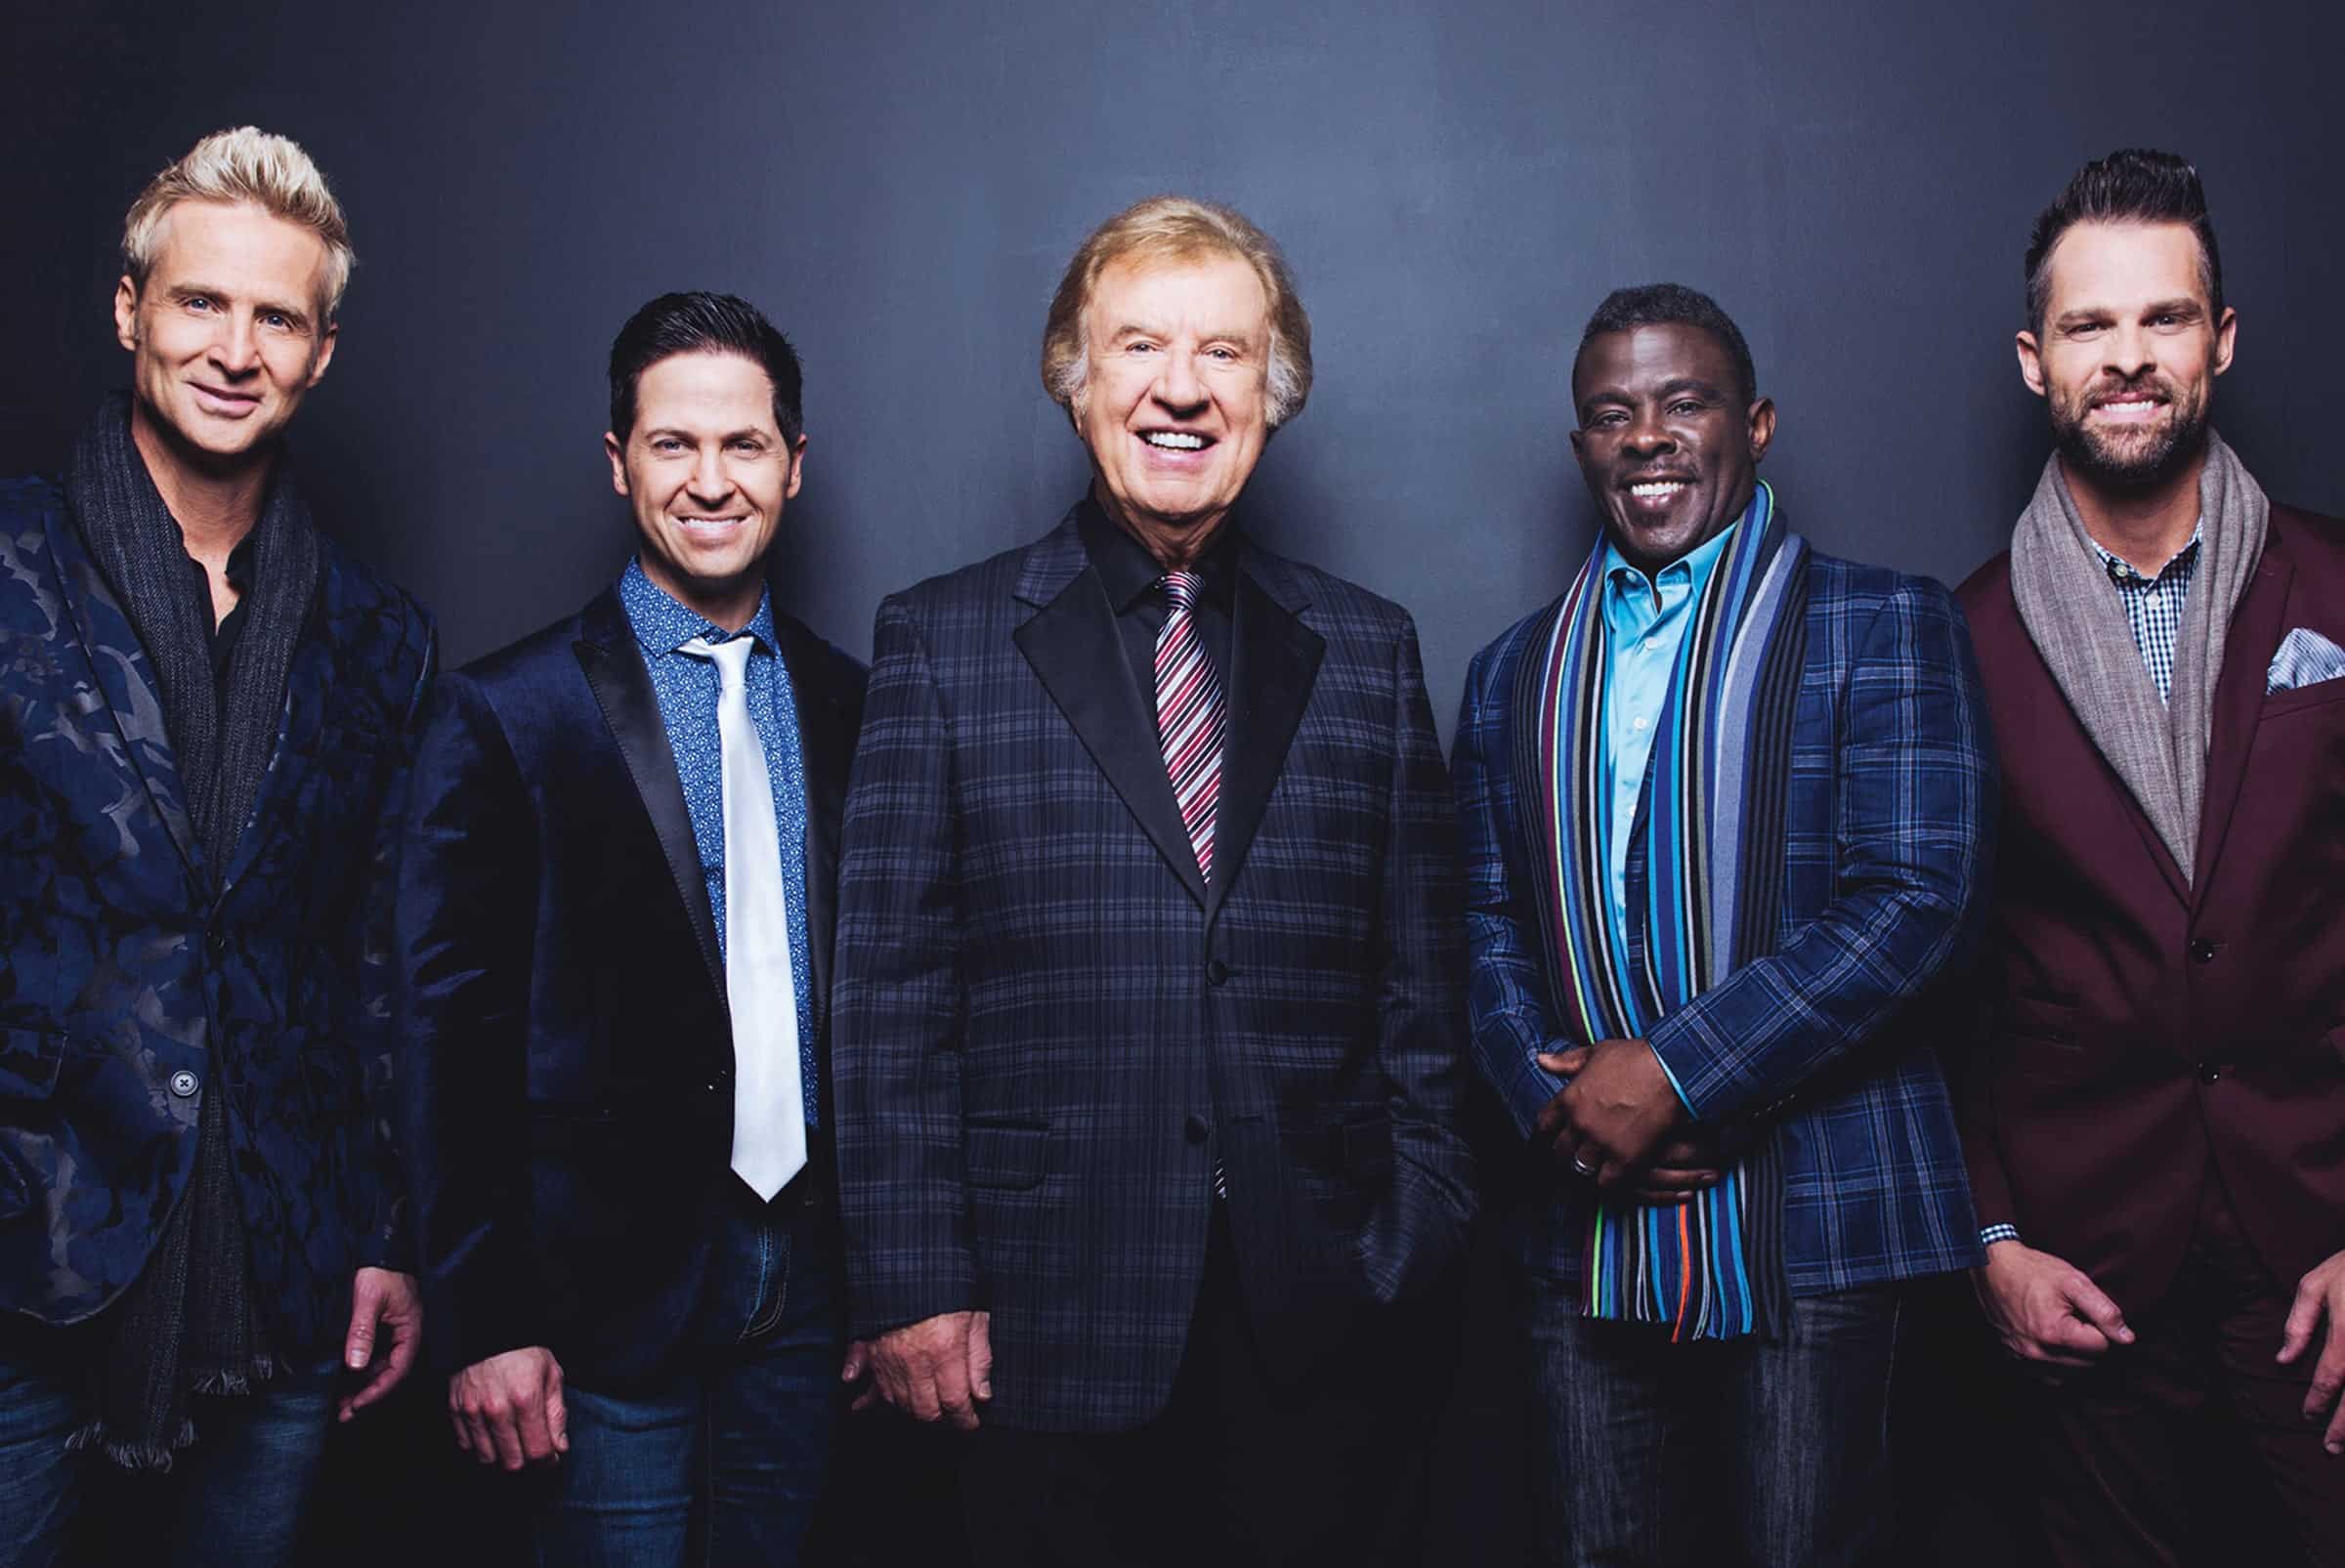 VW LIVE presents Gaither Vocal Band